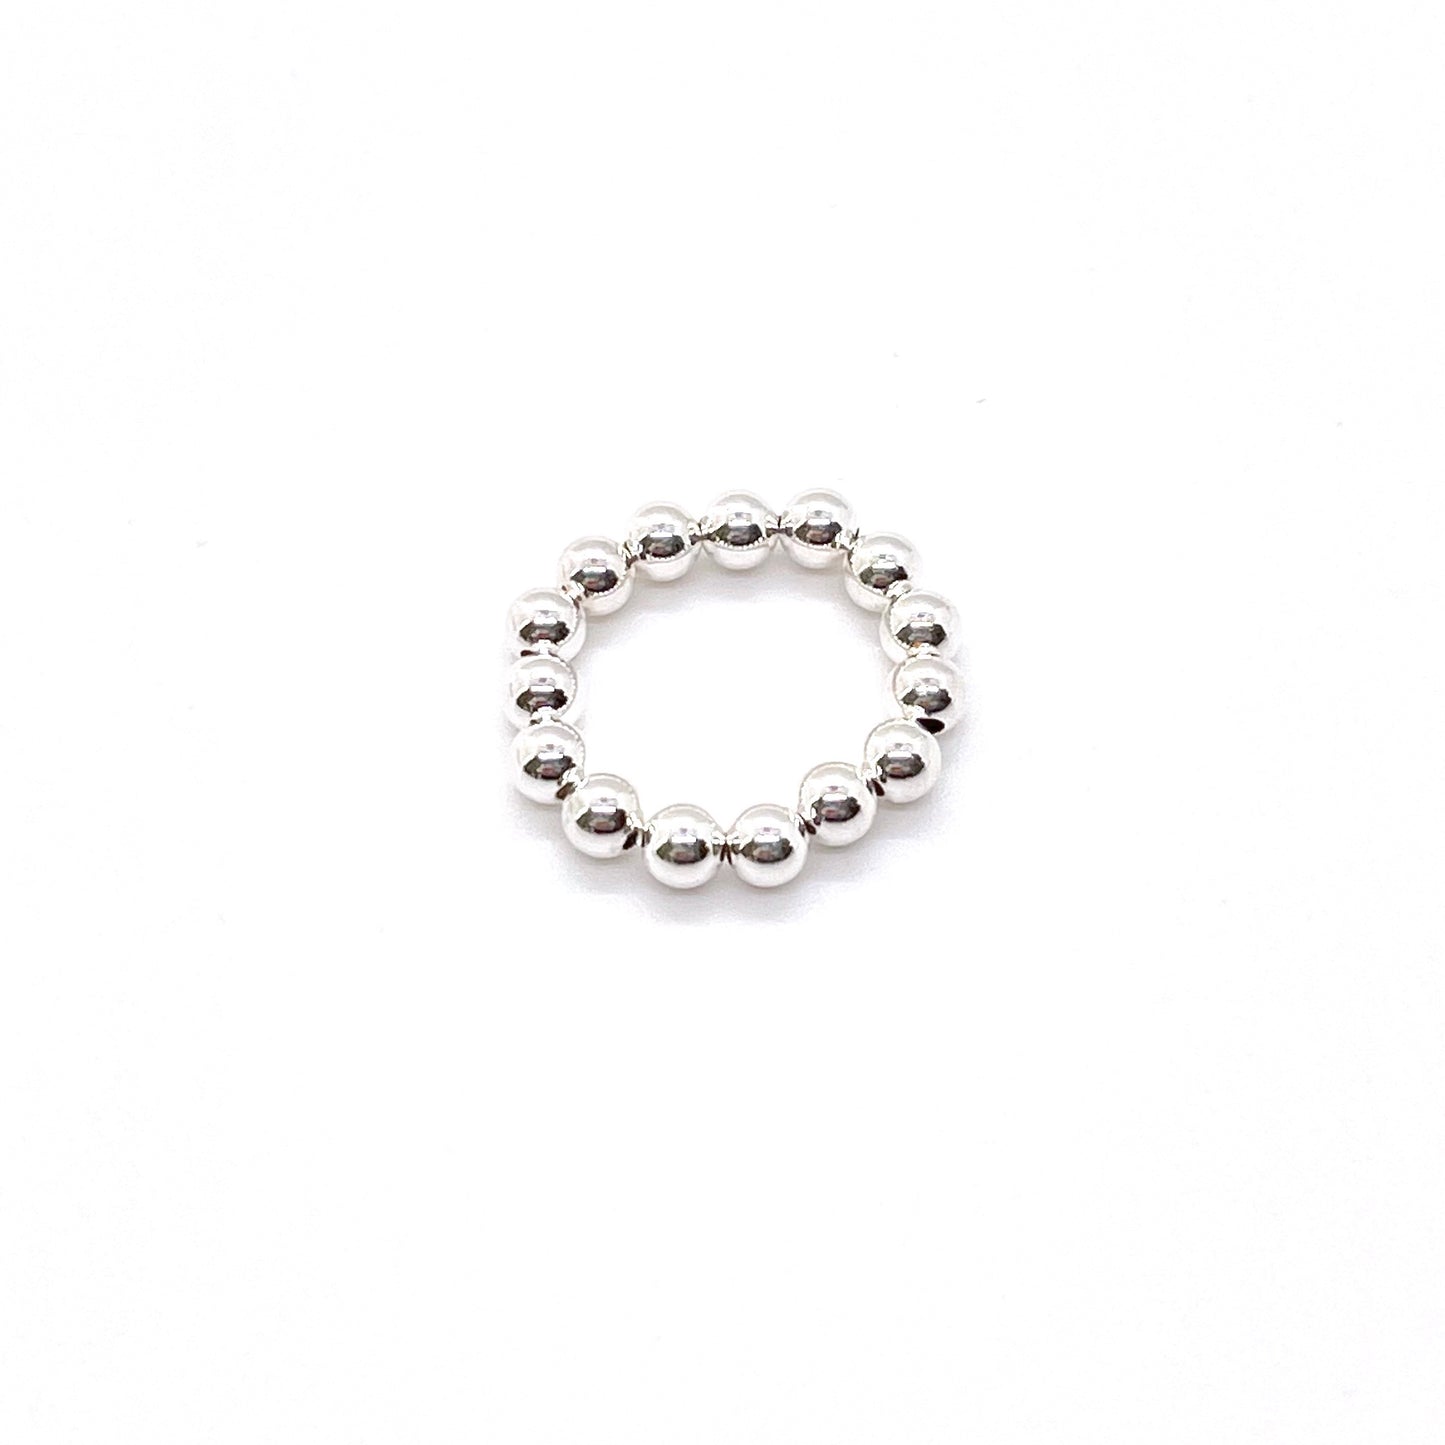 Silver bead ring with 4mm waterproof sterling silver beads on elastic stretch cord.